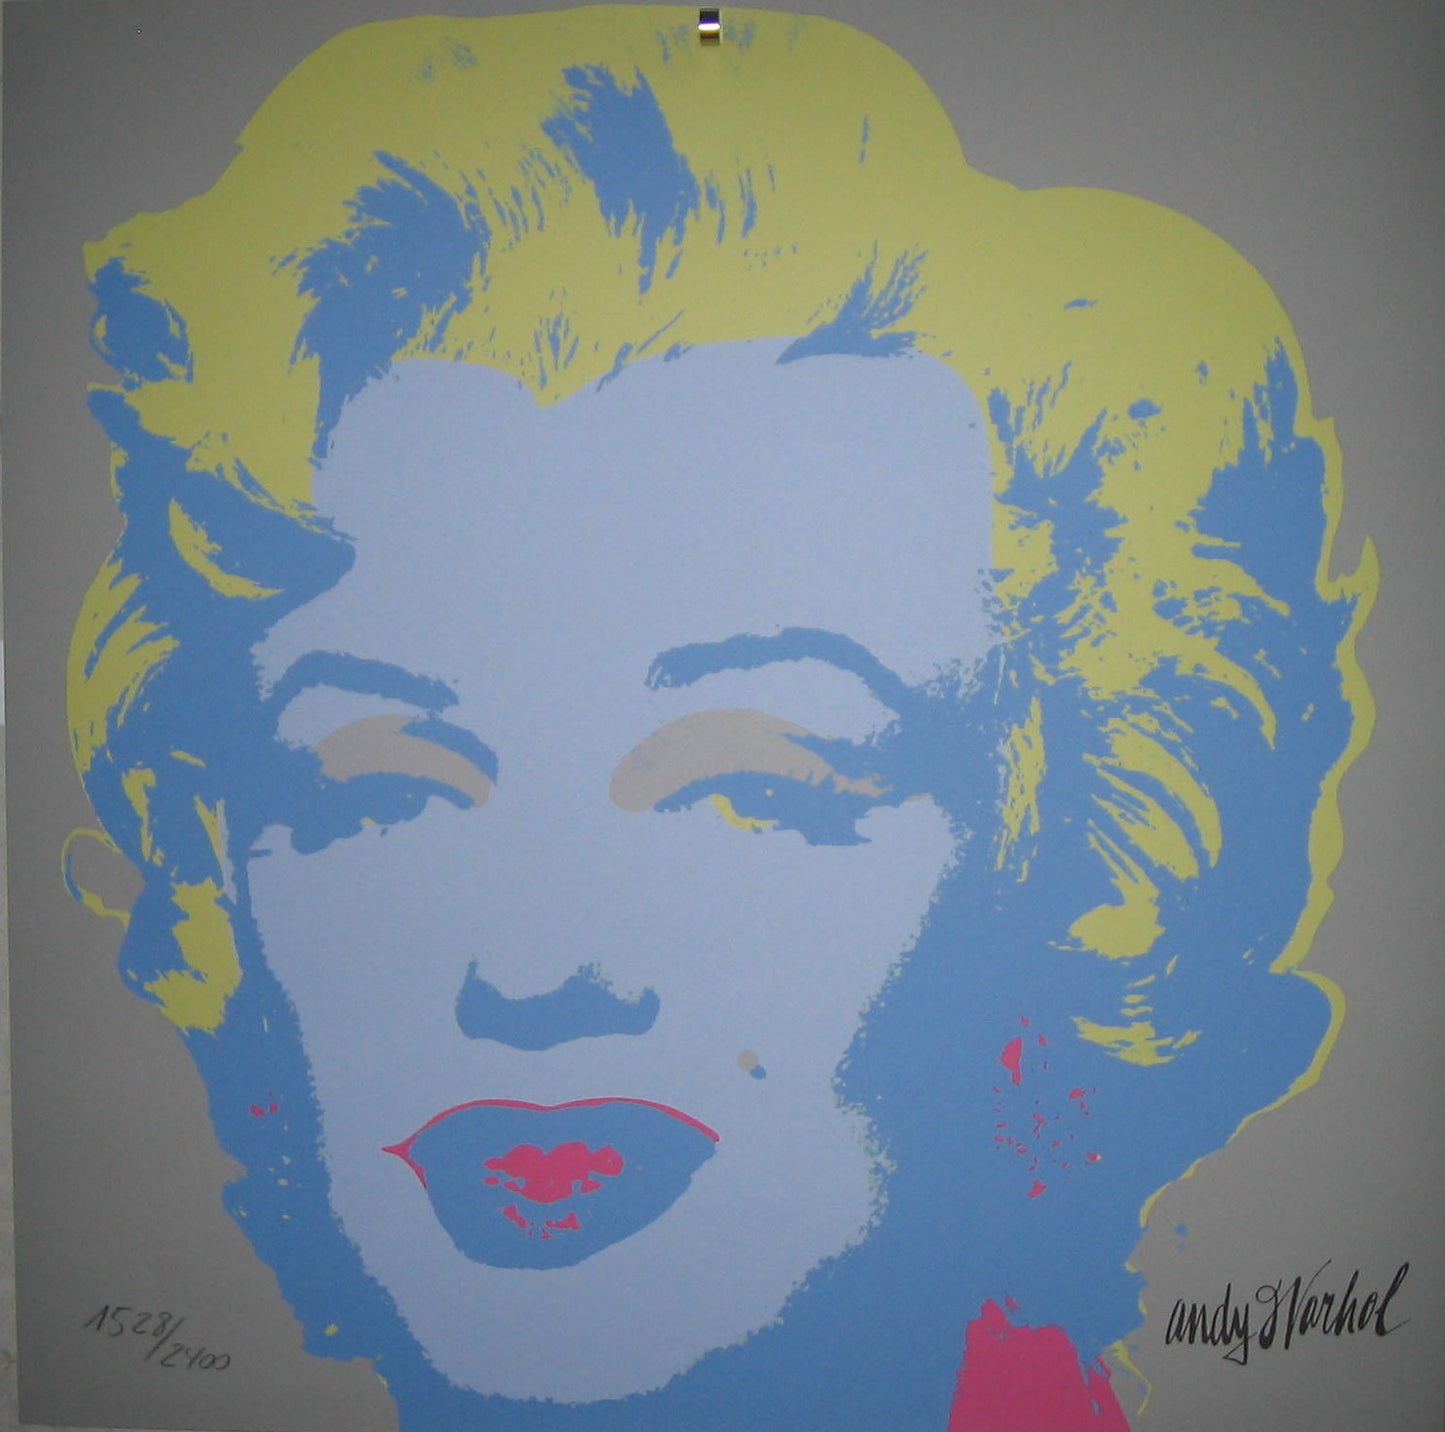 Andy Warhol Marilyn Monroe Lithograph signed numbered edition